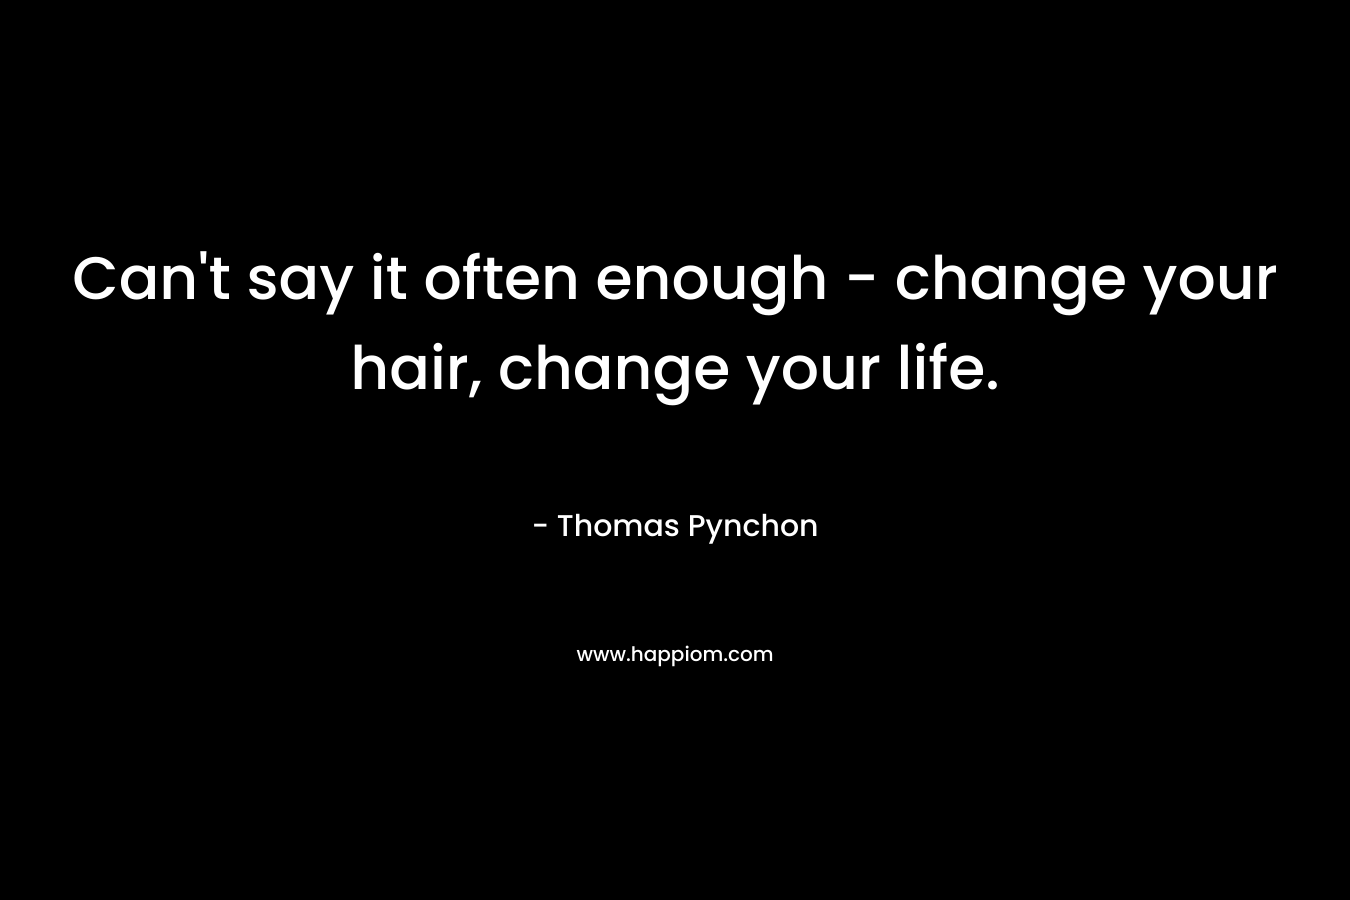 Can't say it often enough - change your hair, change your life.